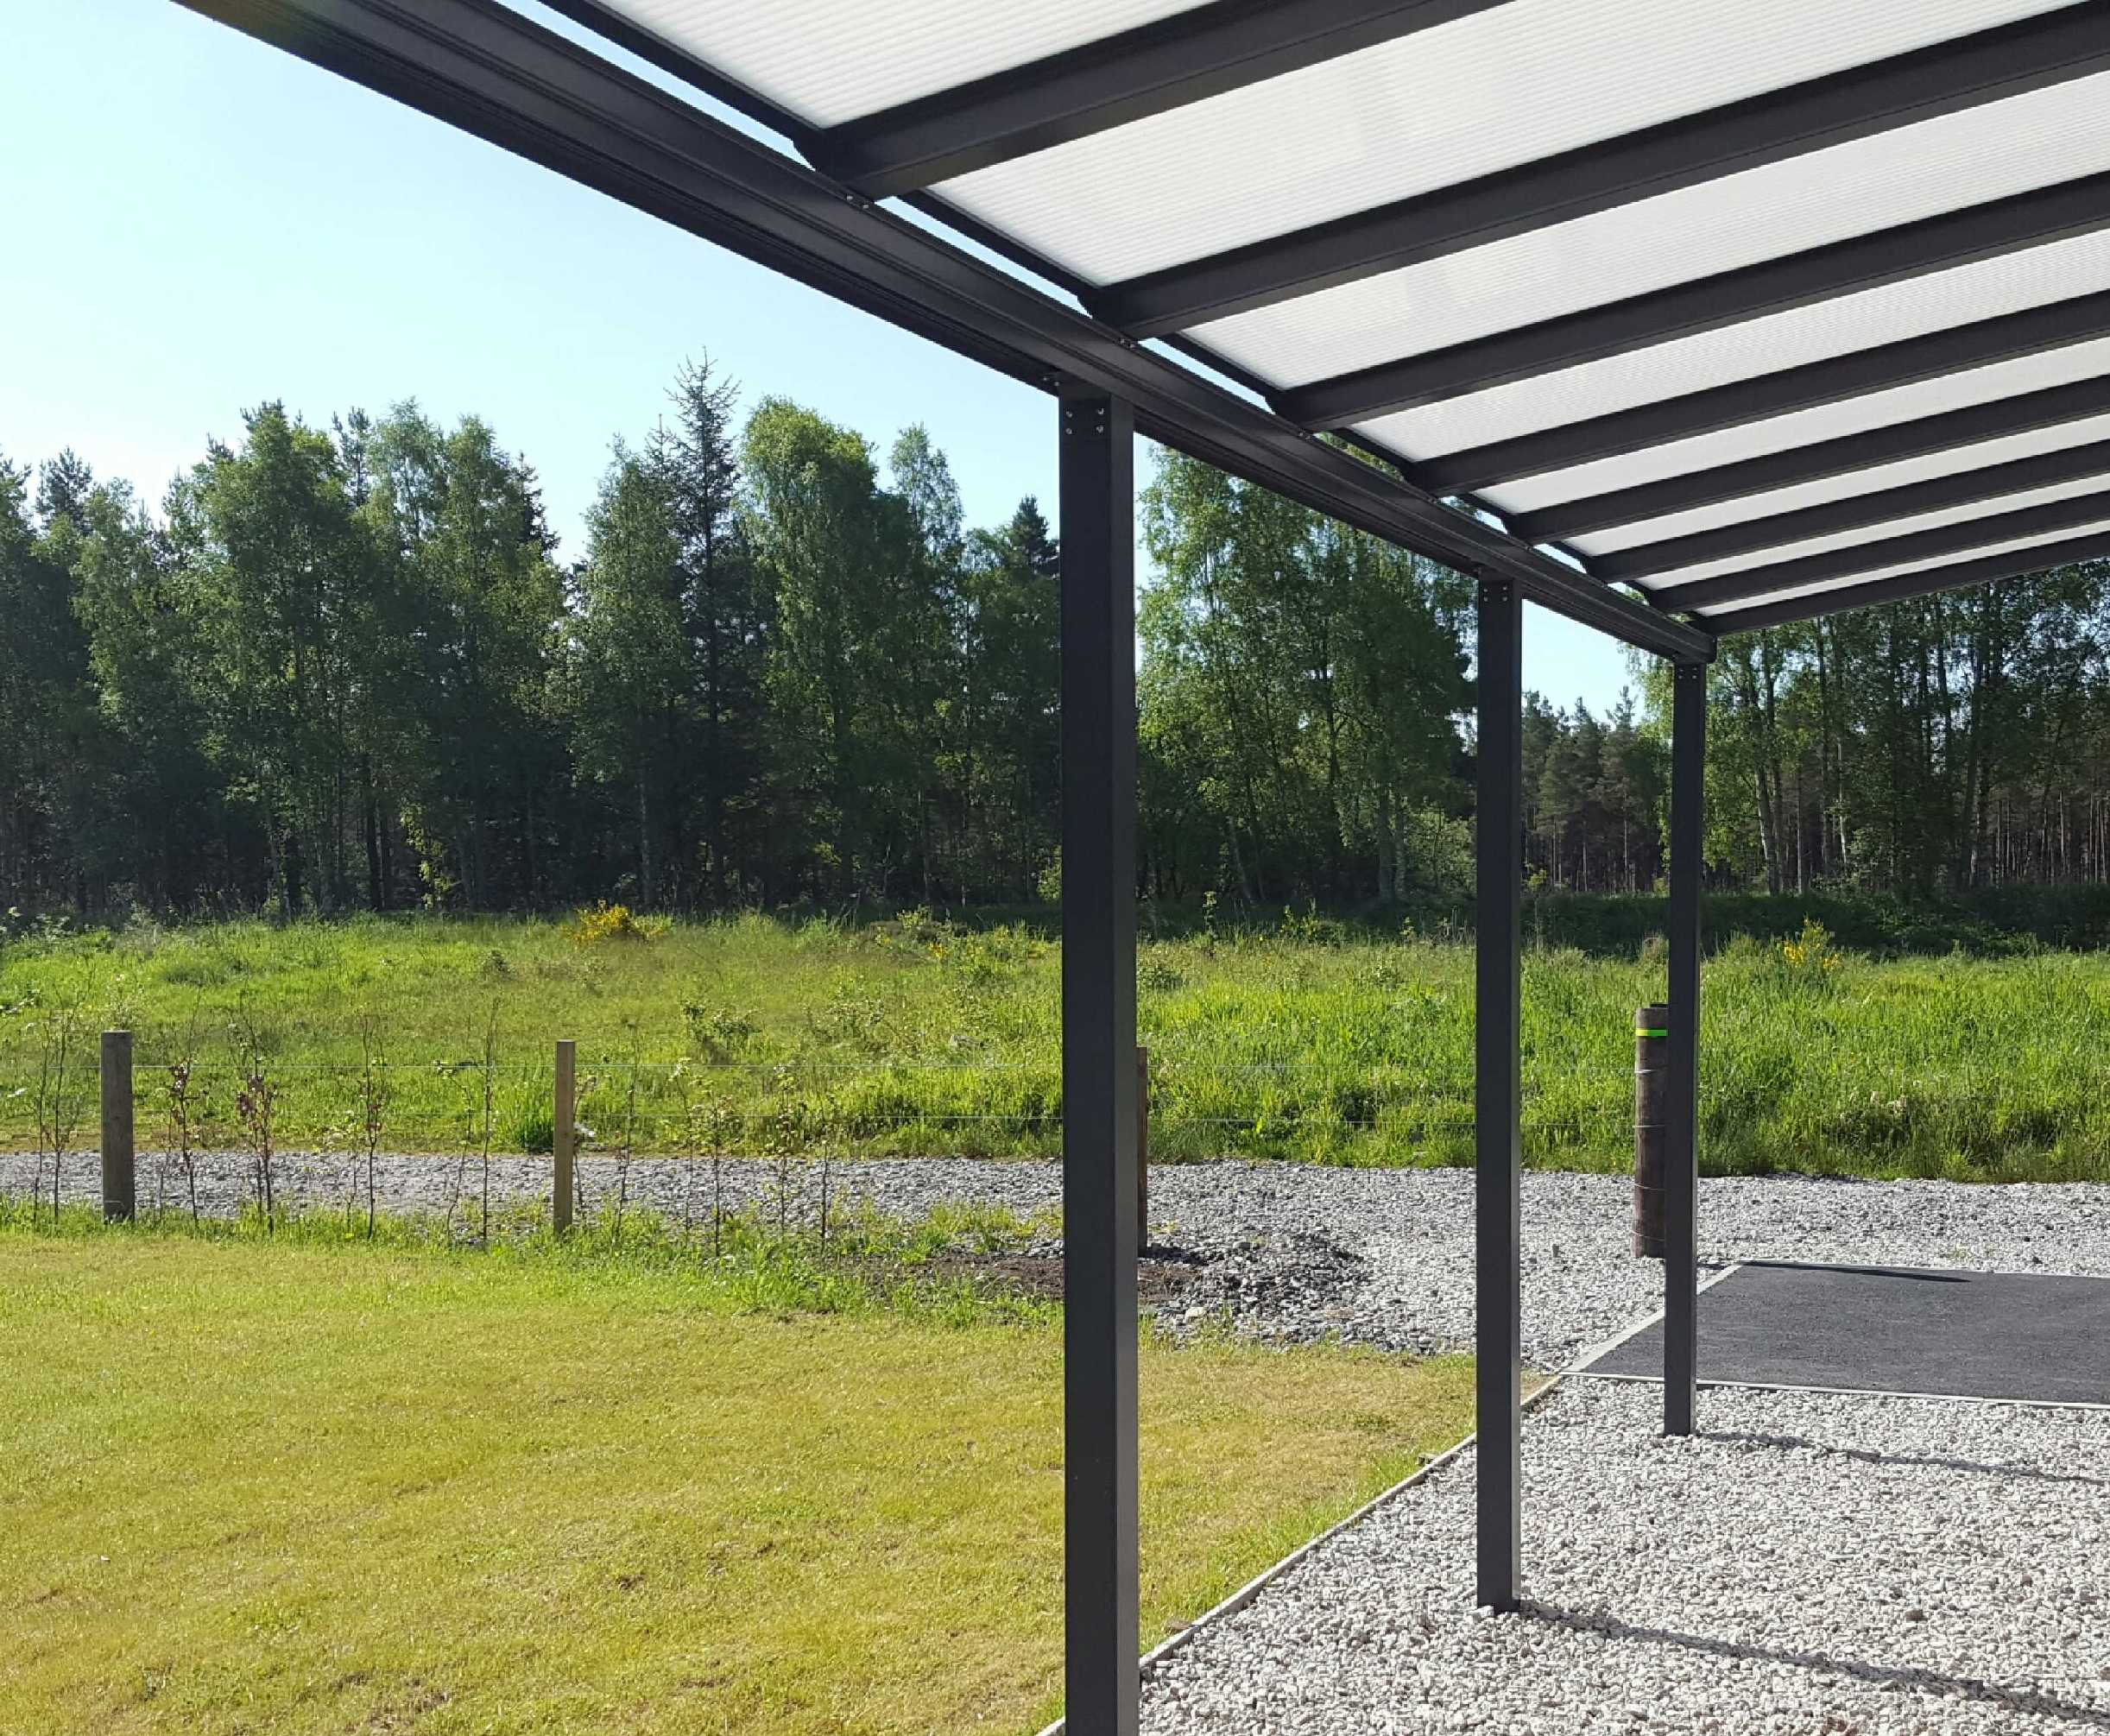 Omega Smart Lean-To Canopy, Anthracite Grey, 6mm Glass Clear Plate Polycarbonate Glazing - 2.8m (W) x 3.5m (P), (2) Supporting Posts